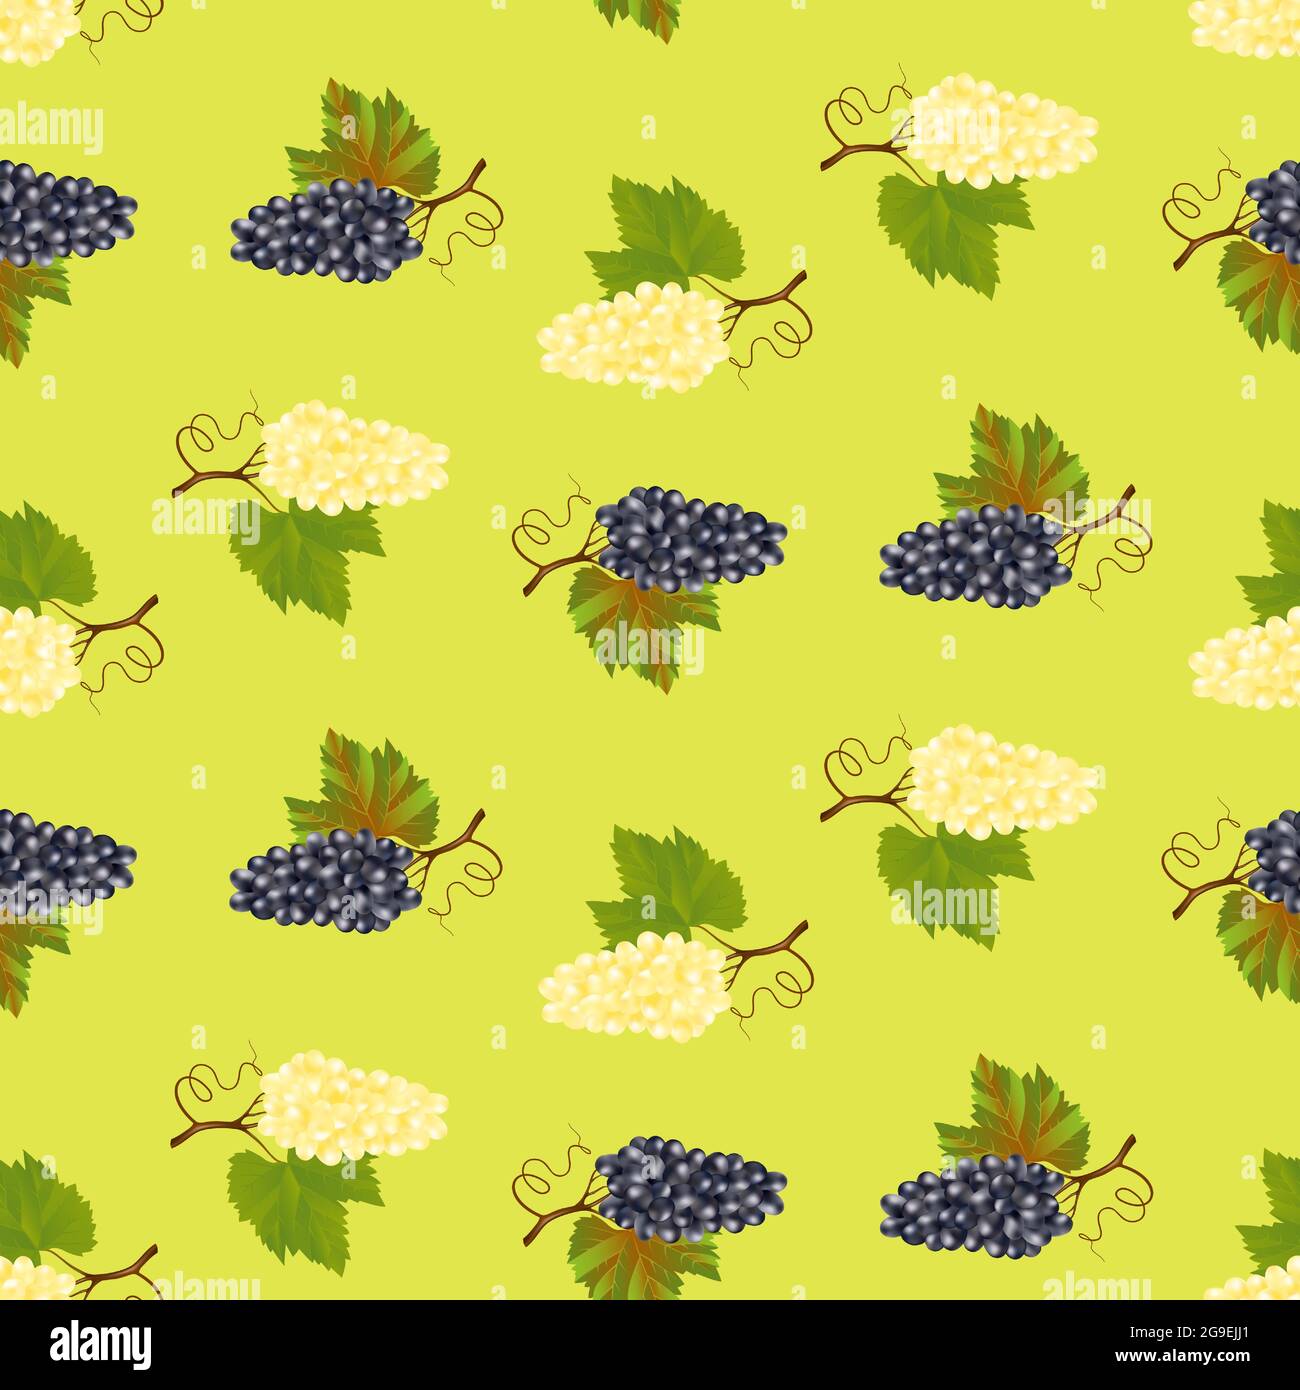 Ripe juicy blue and white grapes on light green background seamless pattern. Vector illustration. For fabric, wallpaper, gift wrapping, scrapbooking. Stock Vector